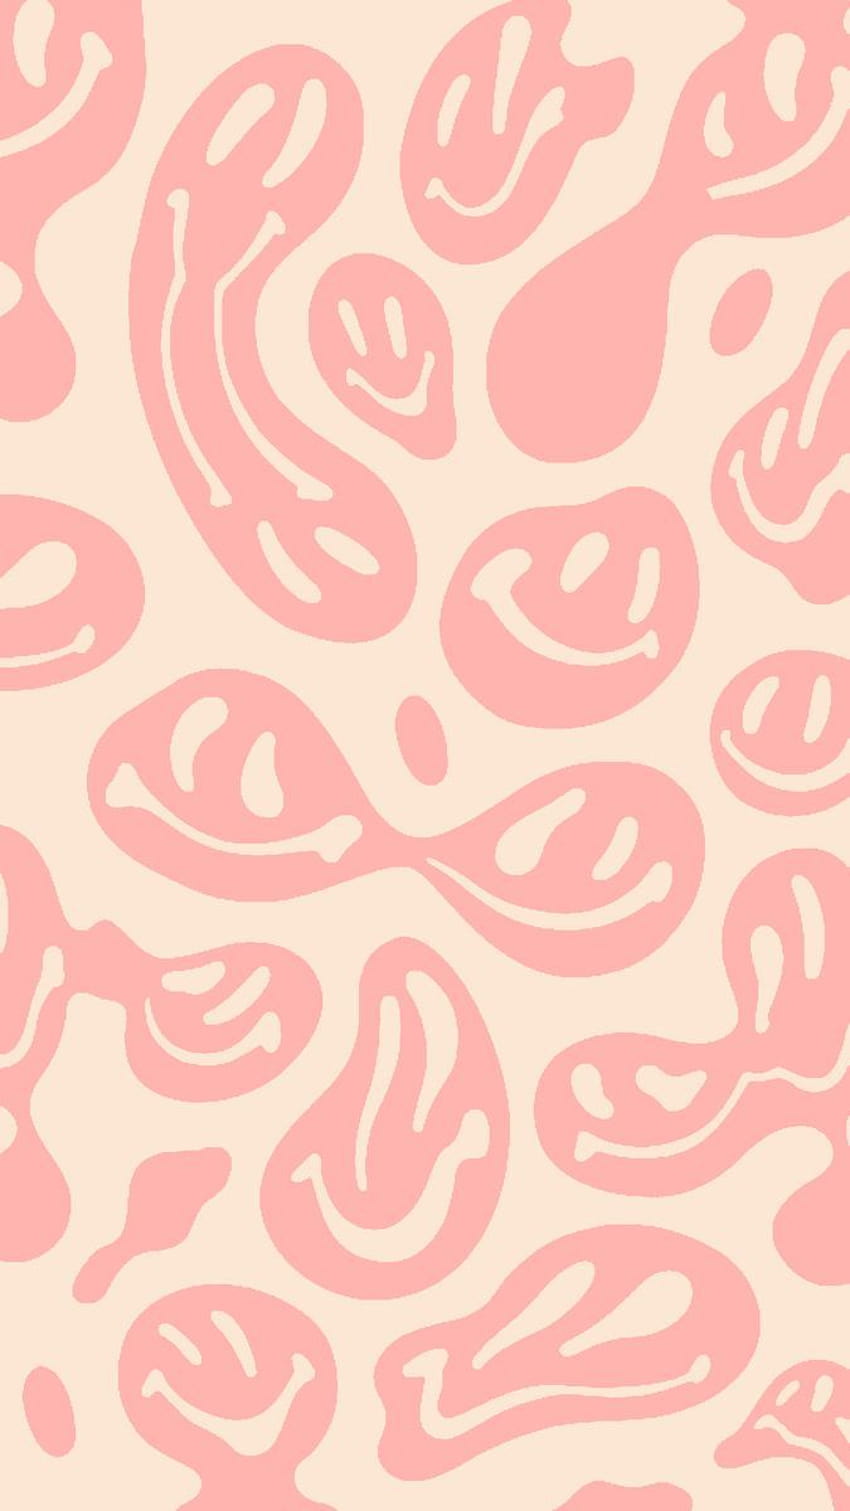 A pink and white pattern with hearts - Preppy, Smiley